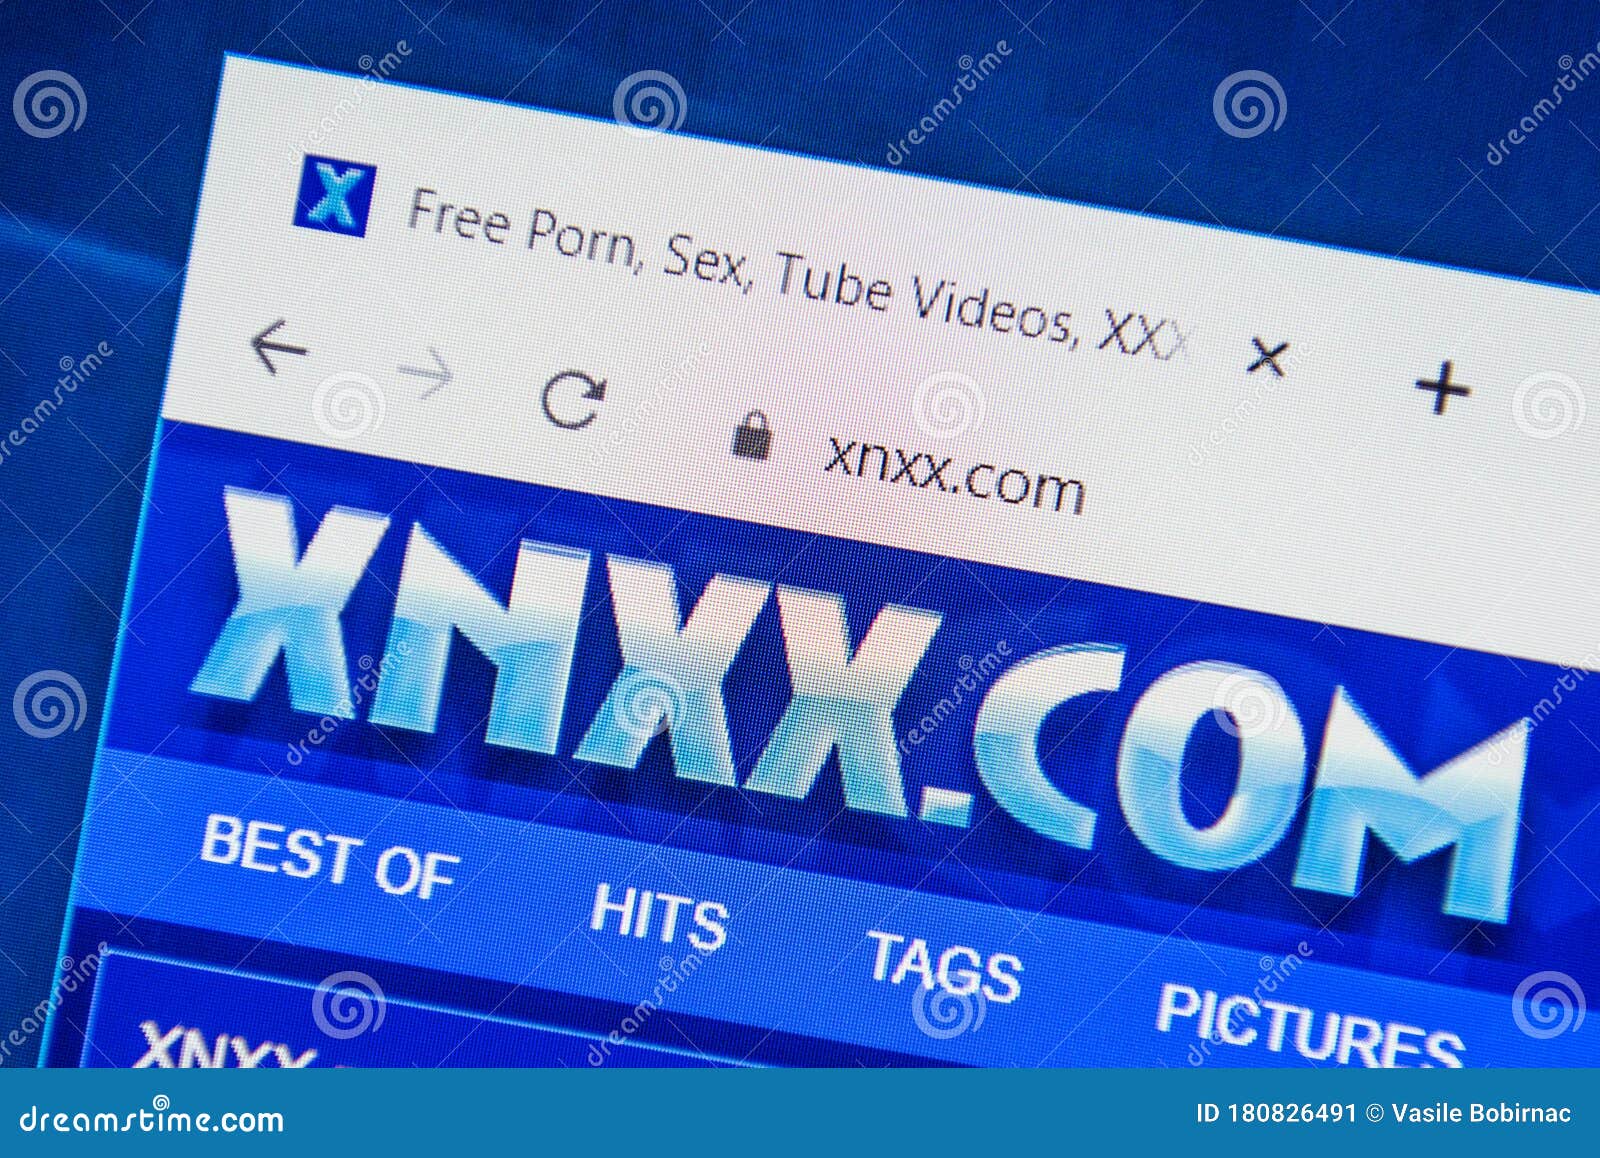 delson davies recommends Is Xnxx Com Safe